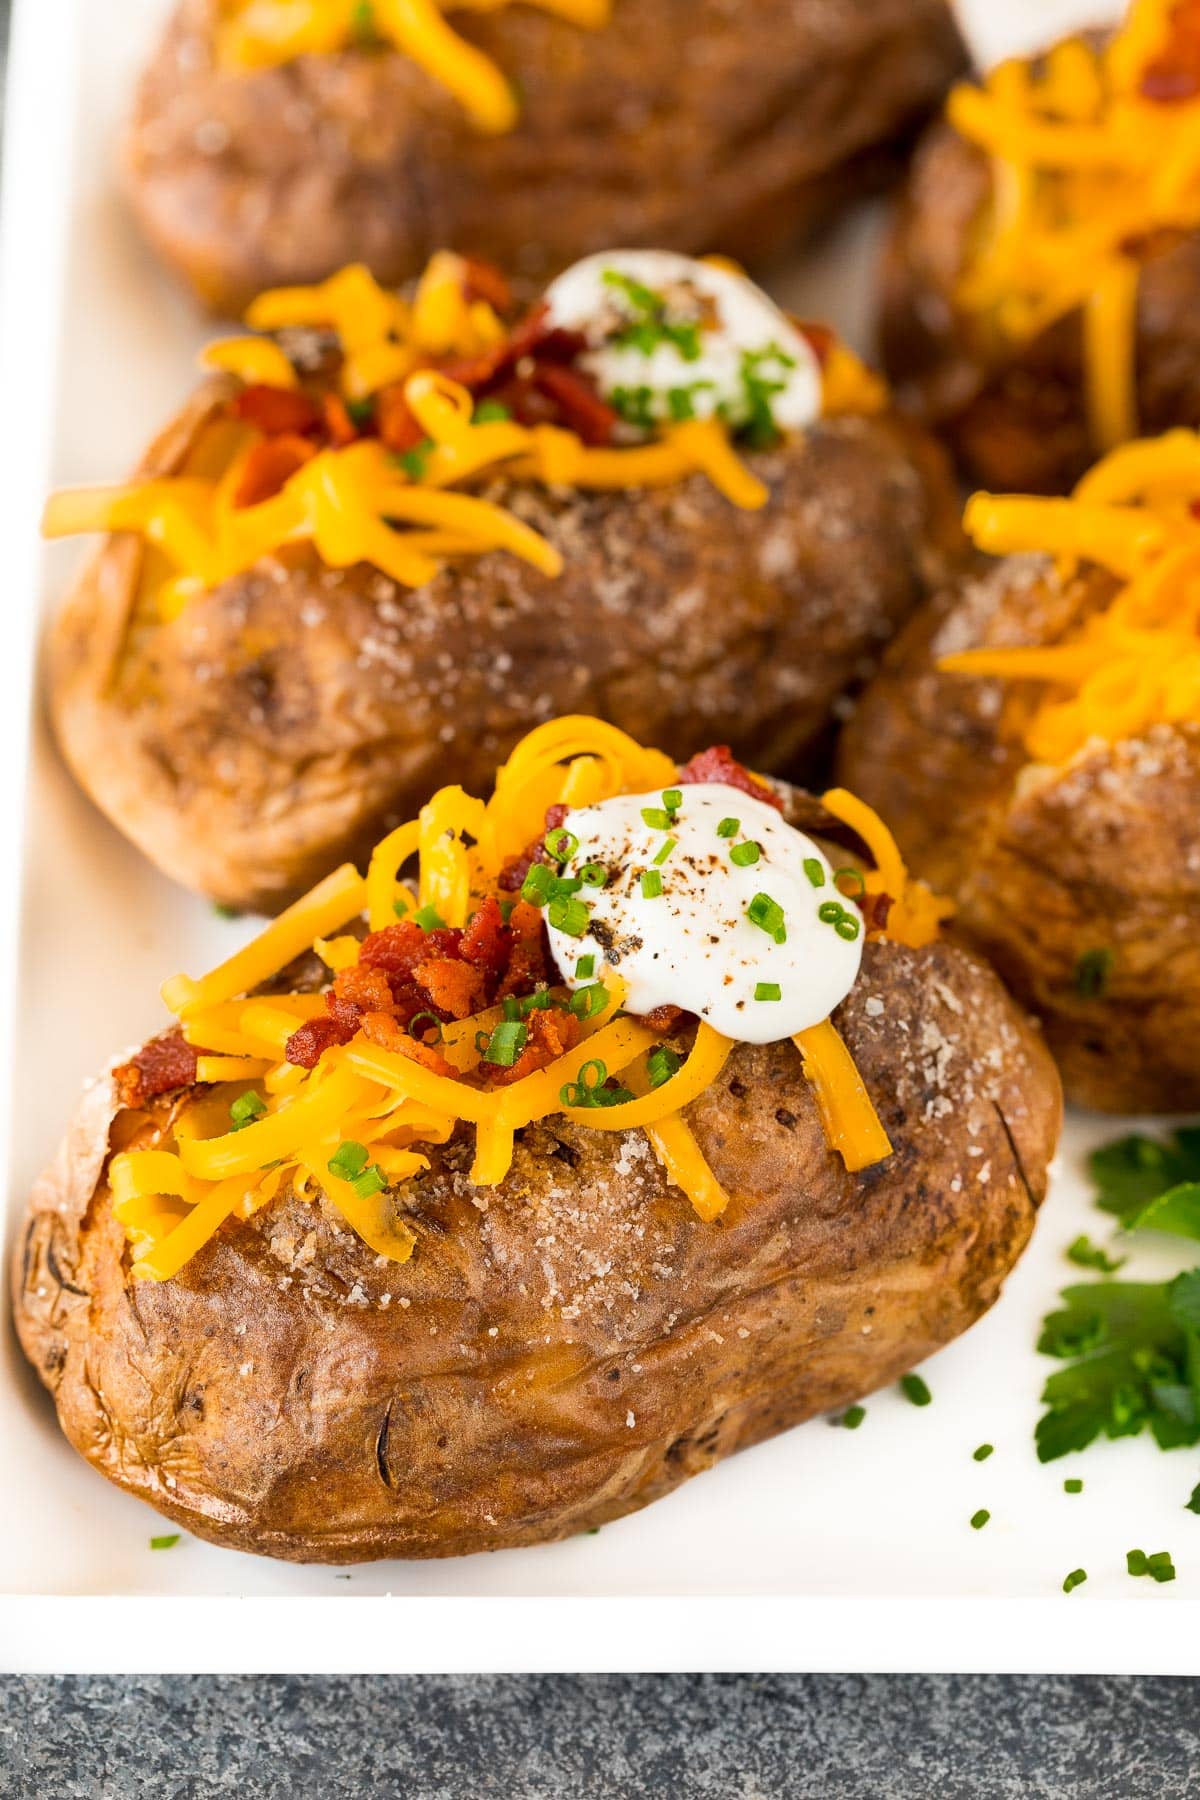 A platter of air fryer baked potatoes topped with cheese and bacon.